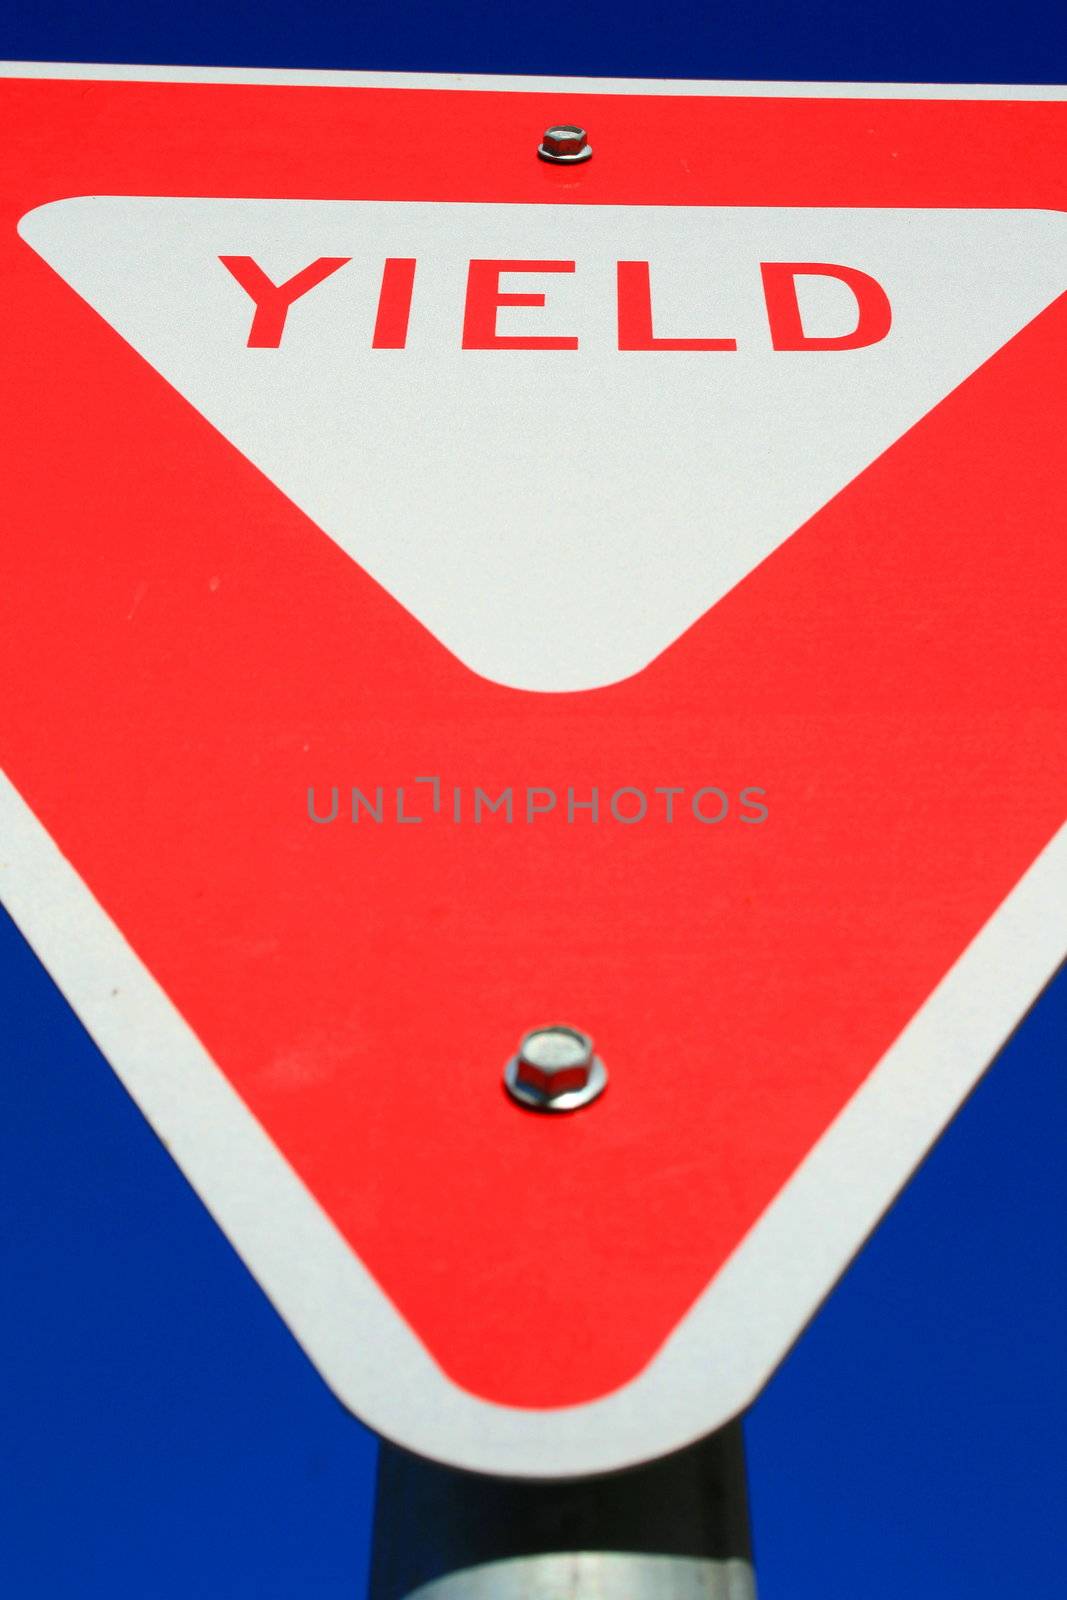 Yield Sign by MichaelFelix